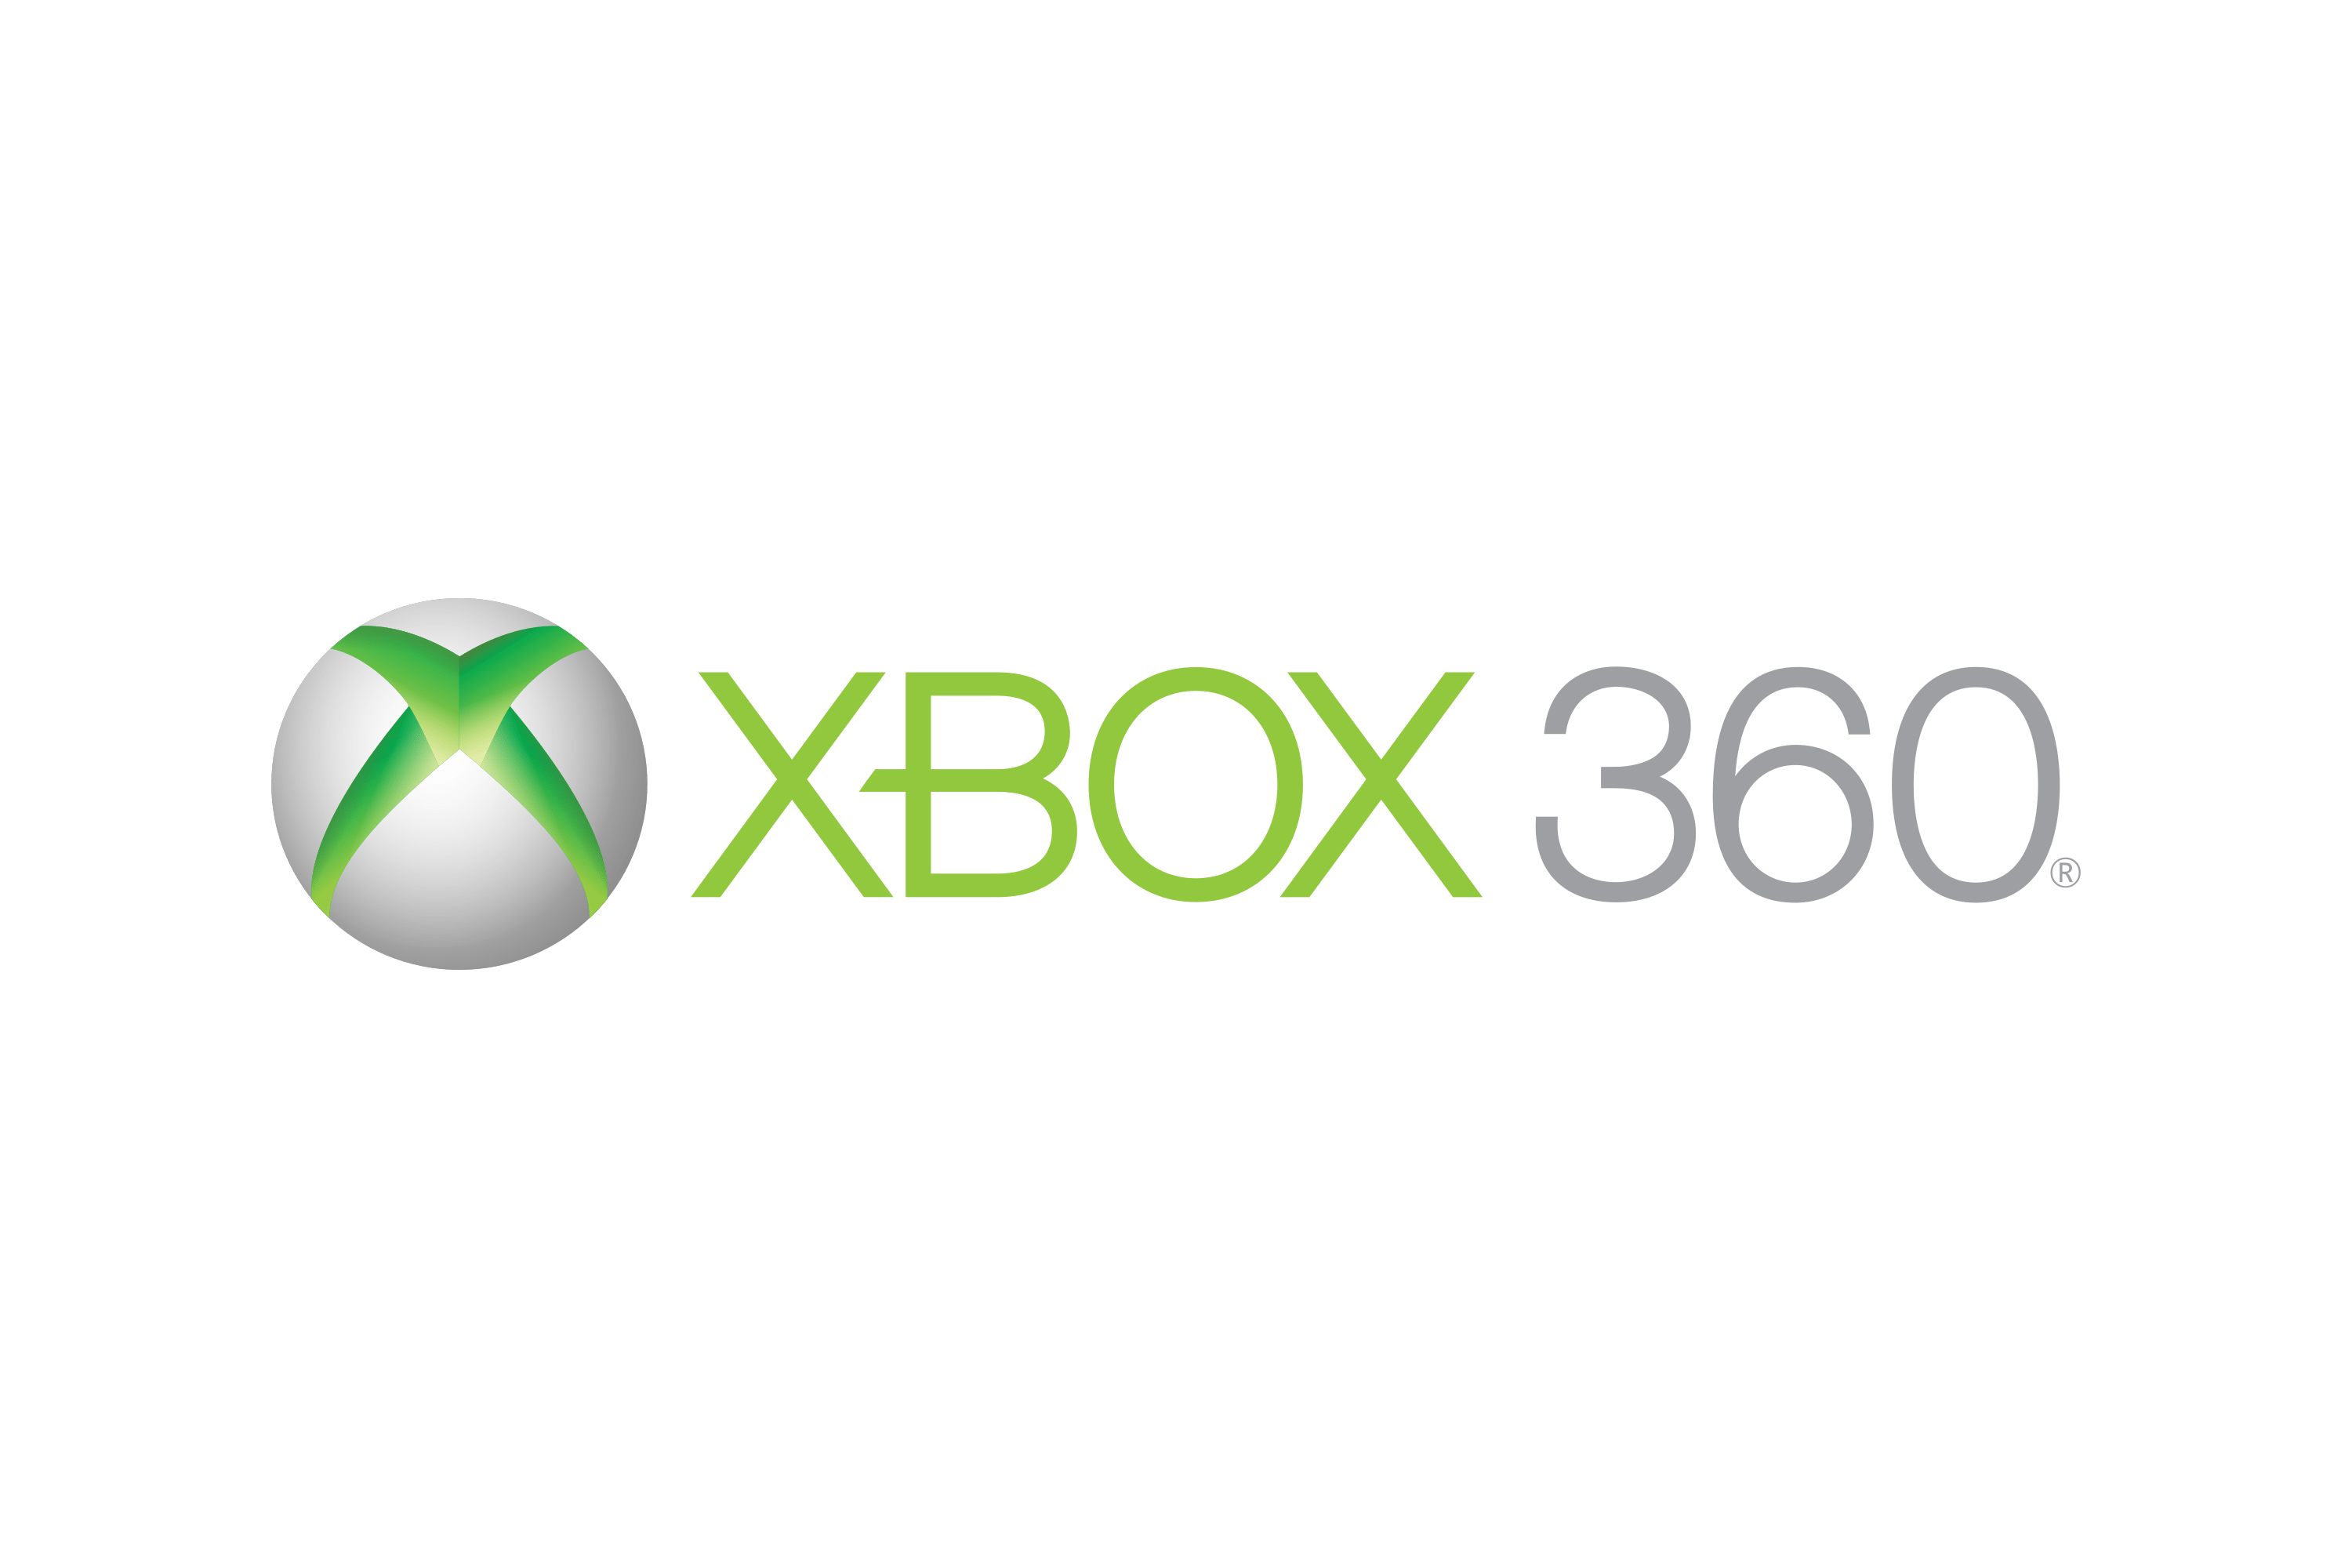 Download Xbox 360 Logo in SVG Vector or PNG File Format